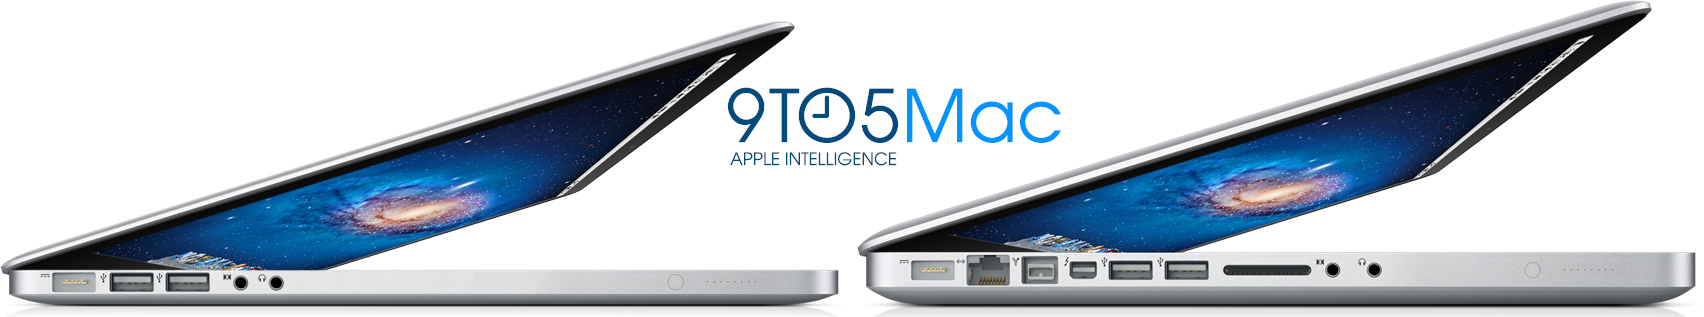 ↪ And here are the possible specifications for the new 15 ″ MacBooks Pro with Retina display!